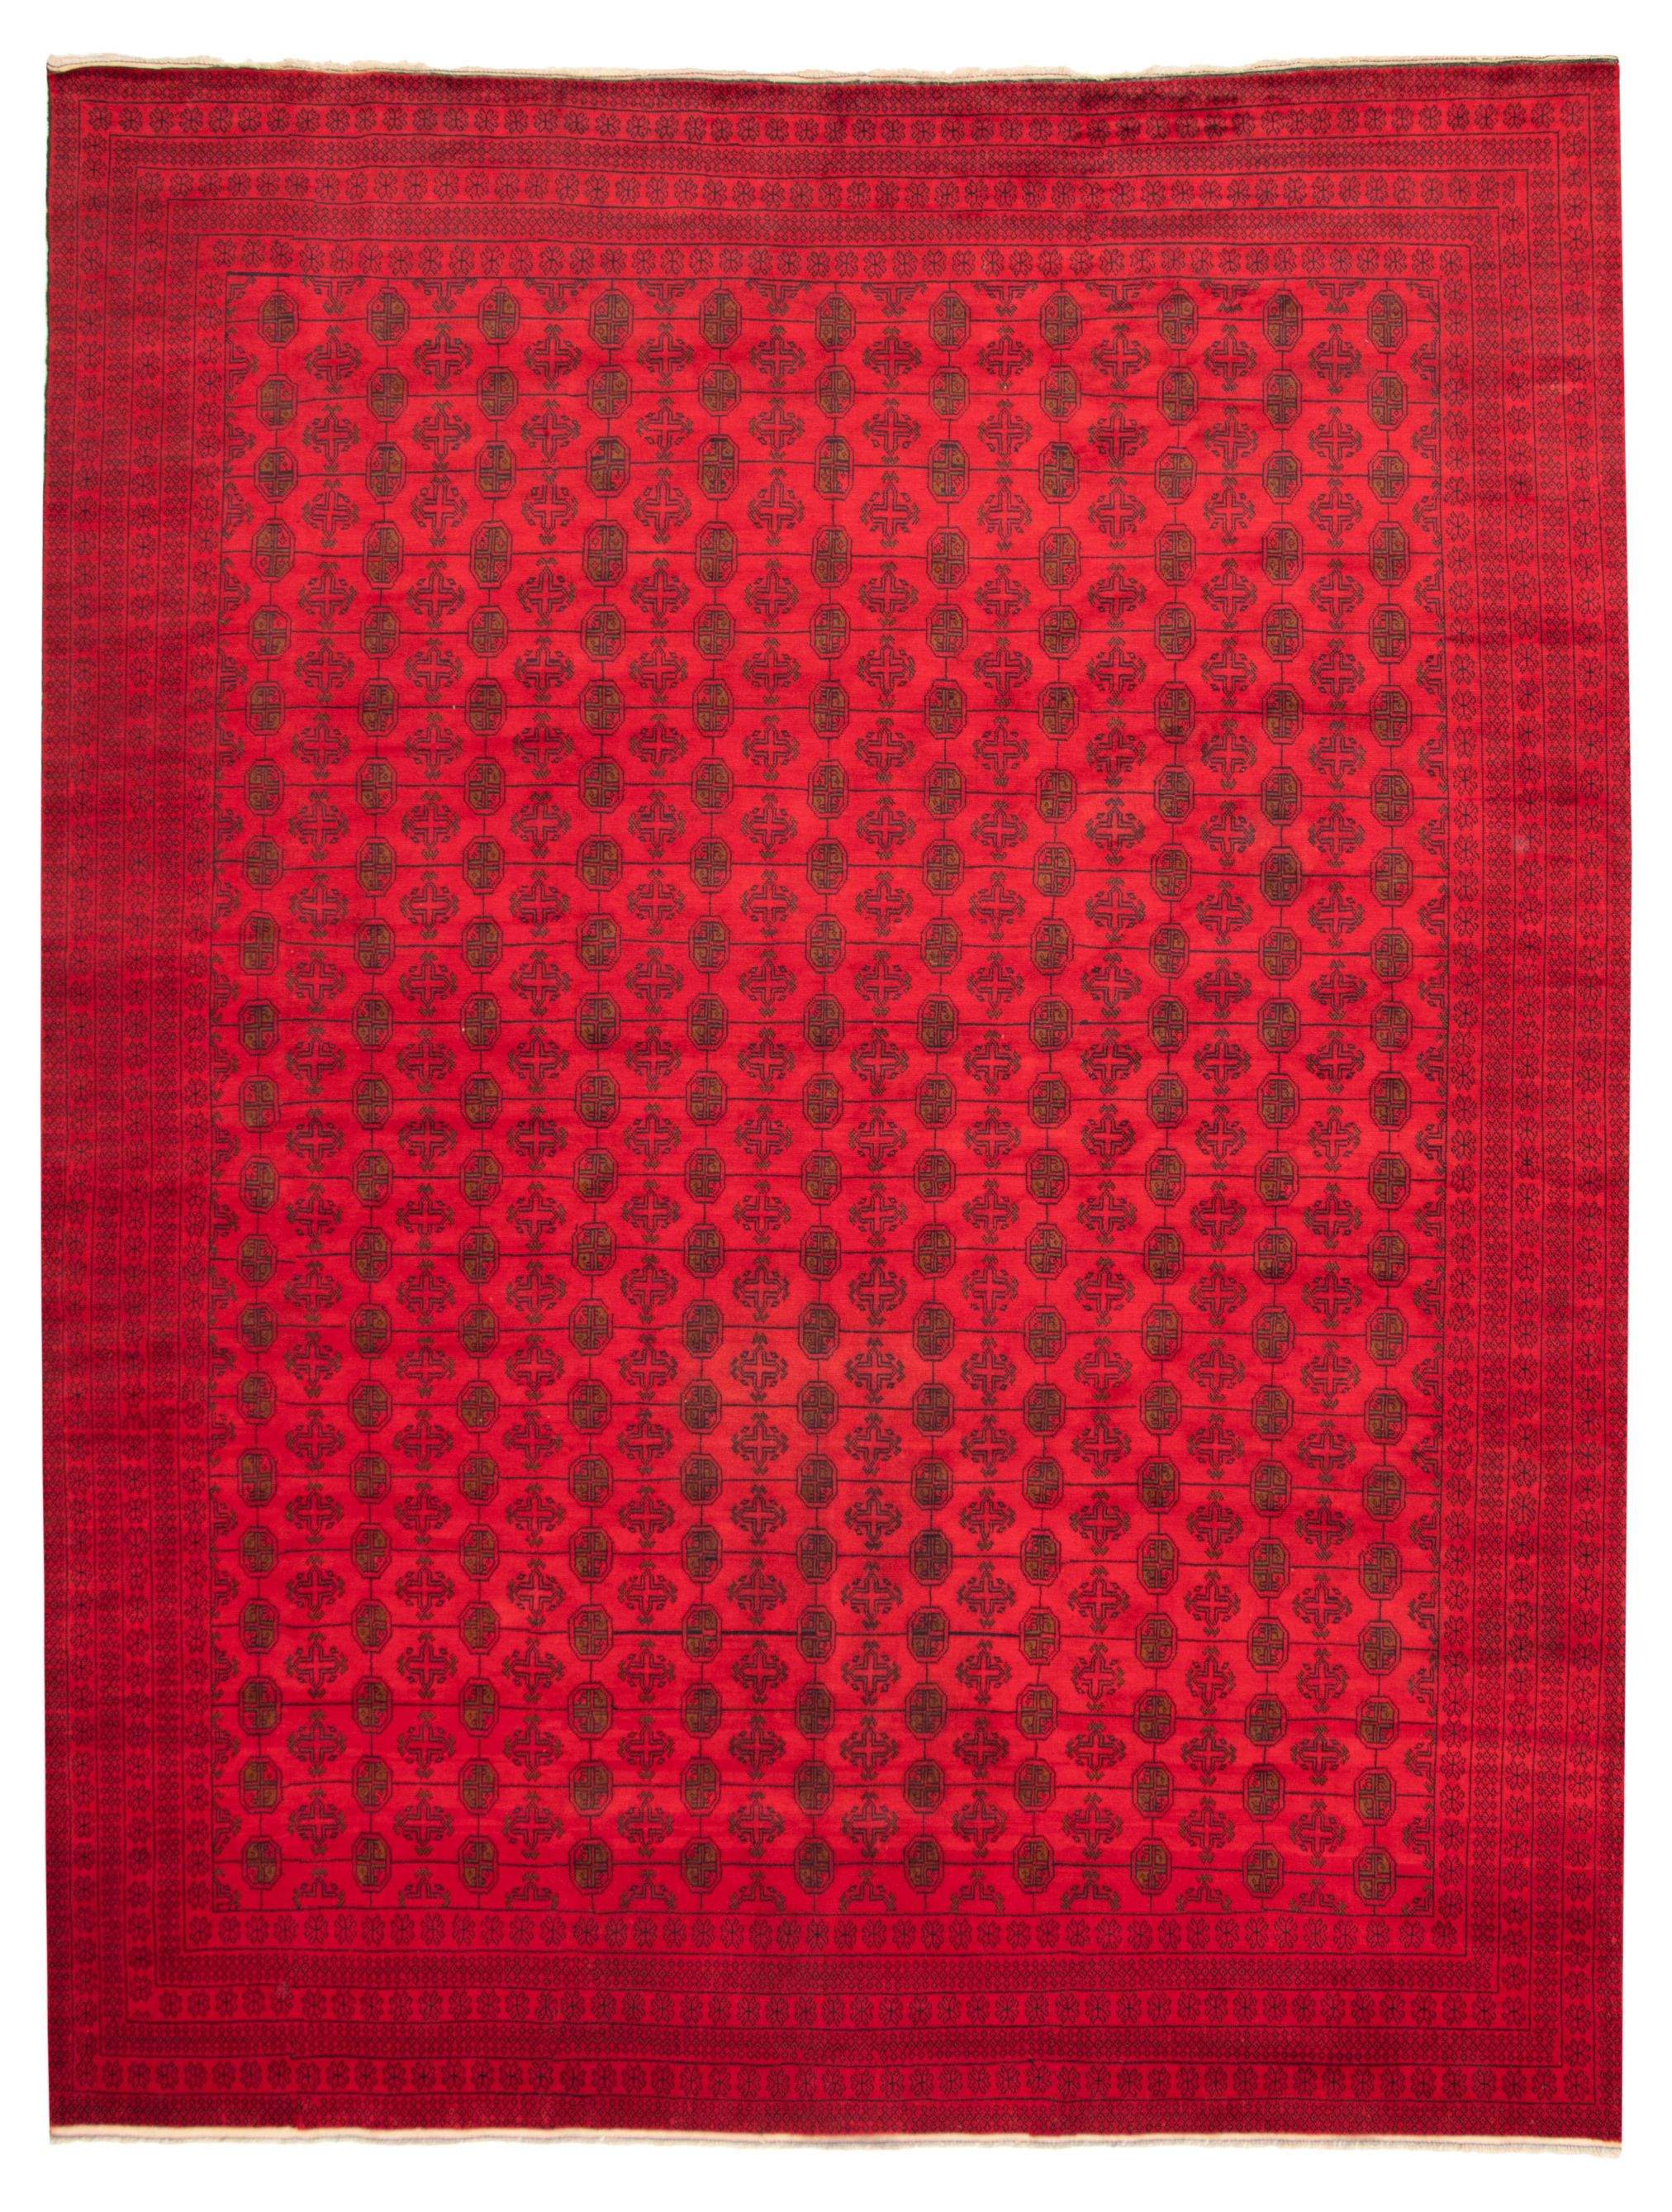 Hand-knotted Teimani Red Wool Rug 10'0" x 13'2"  Size: 10'0" x 13'2"  